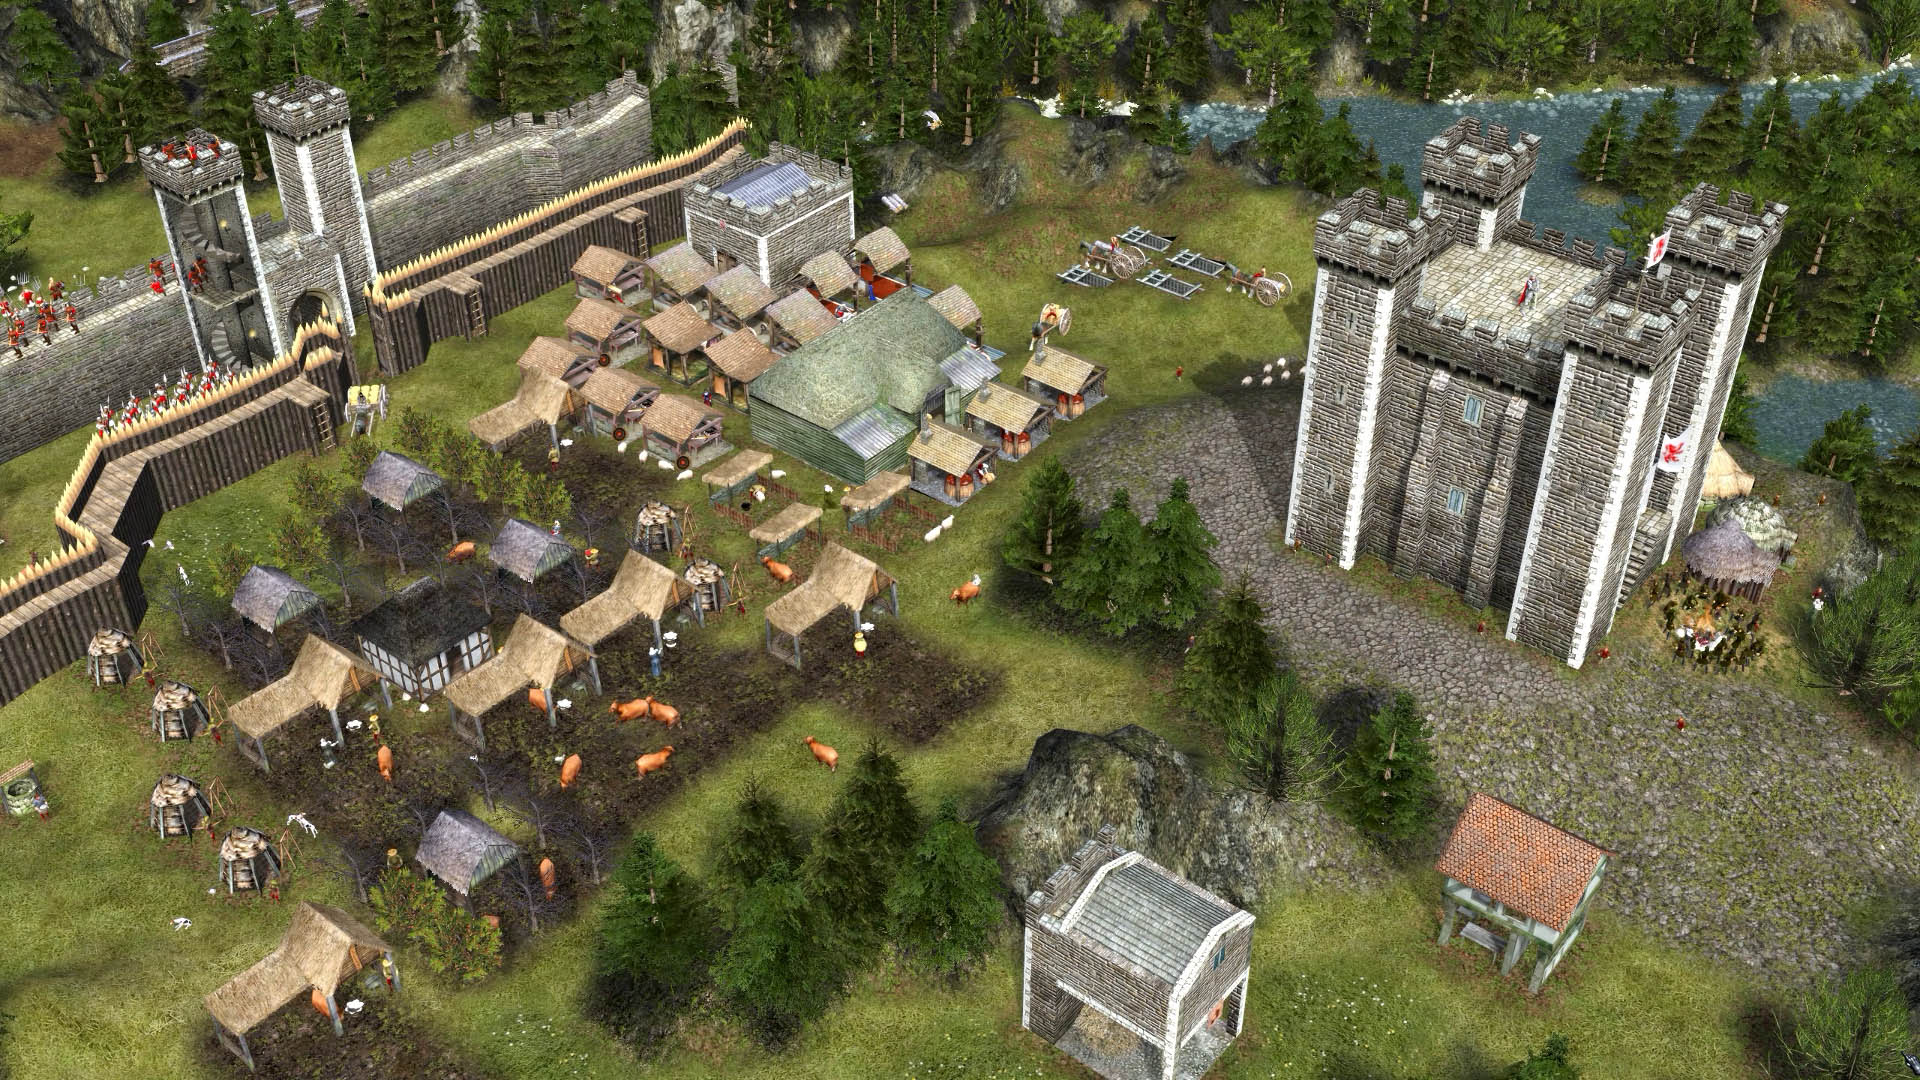 stronghold 2 maps